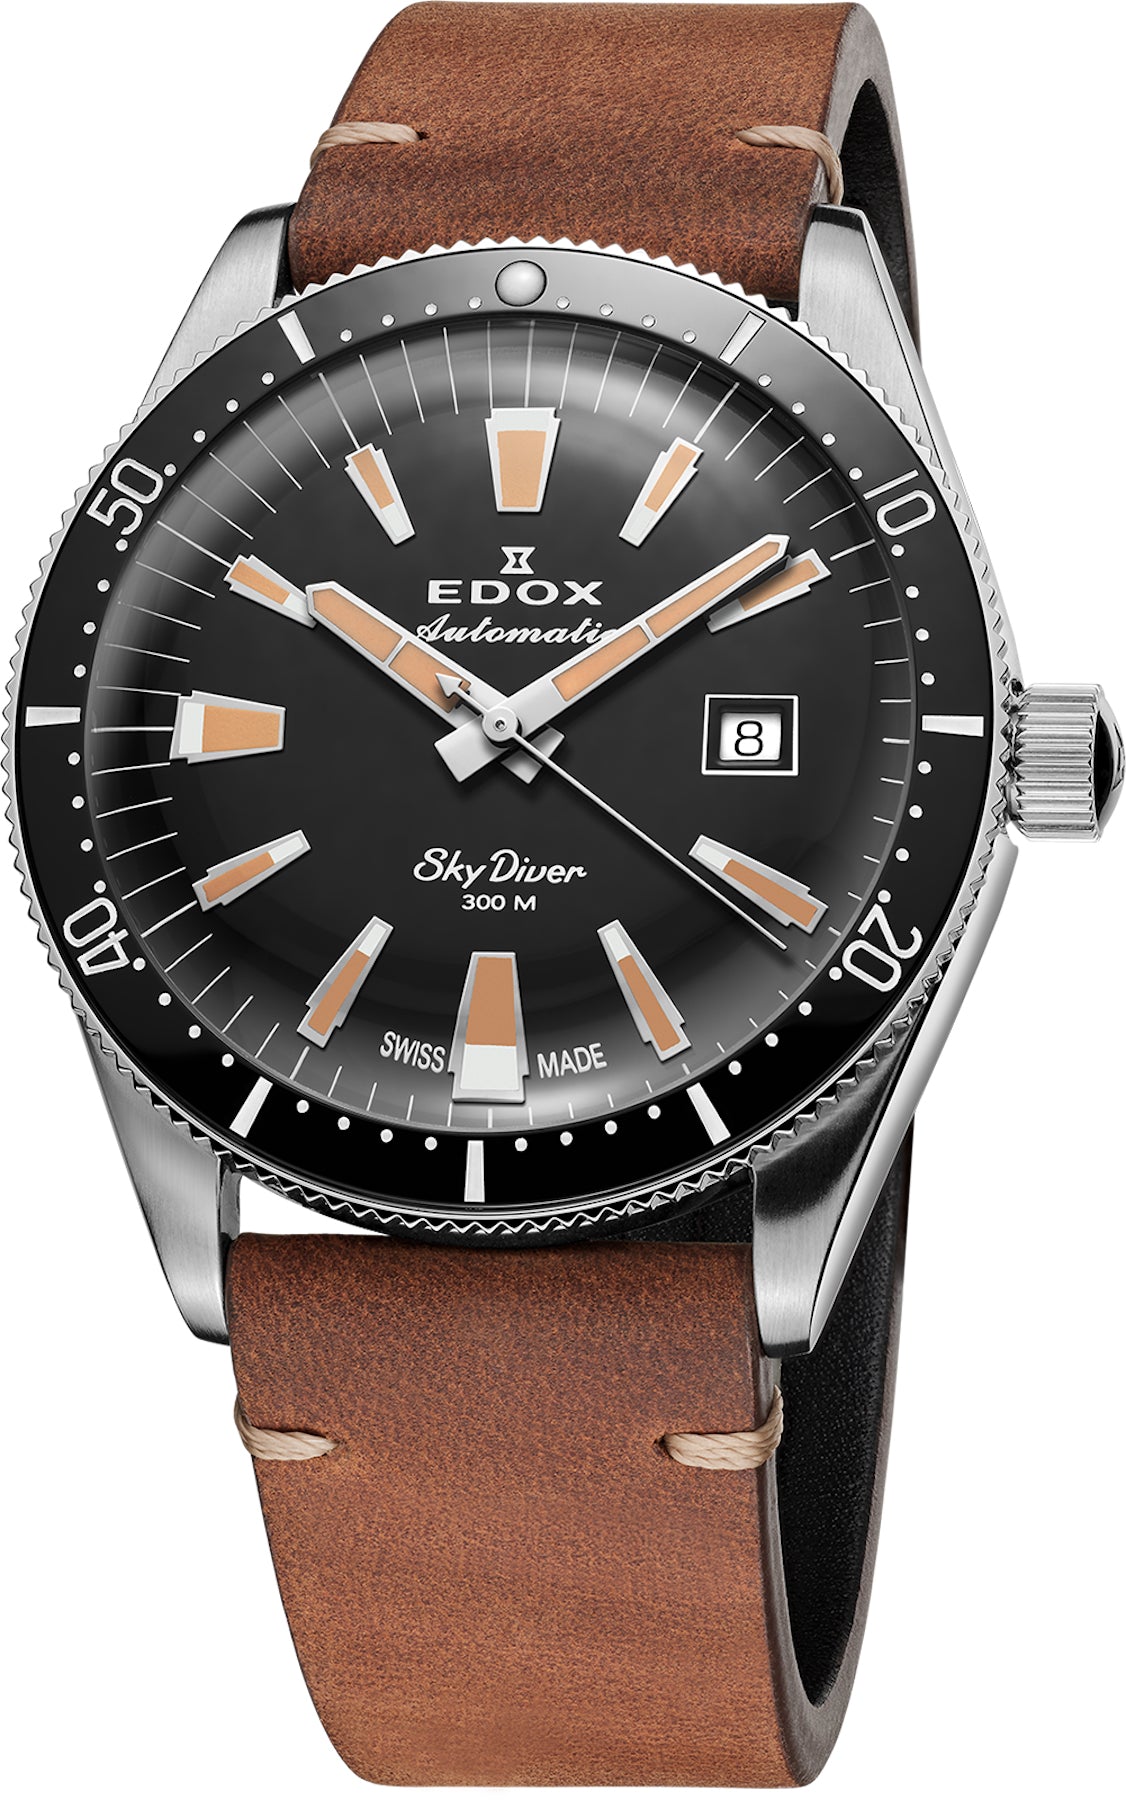 Edox Watch Skydiver Date Automatic Limited Edition